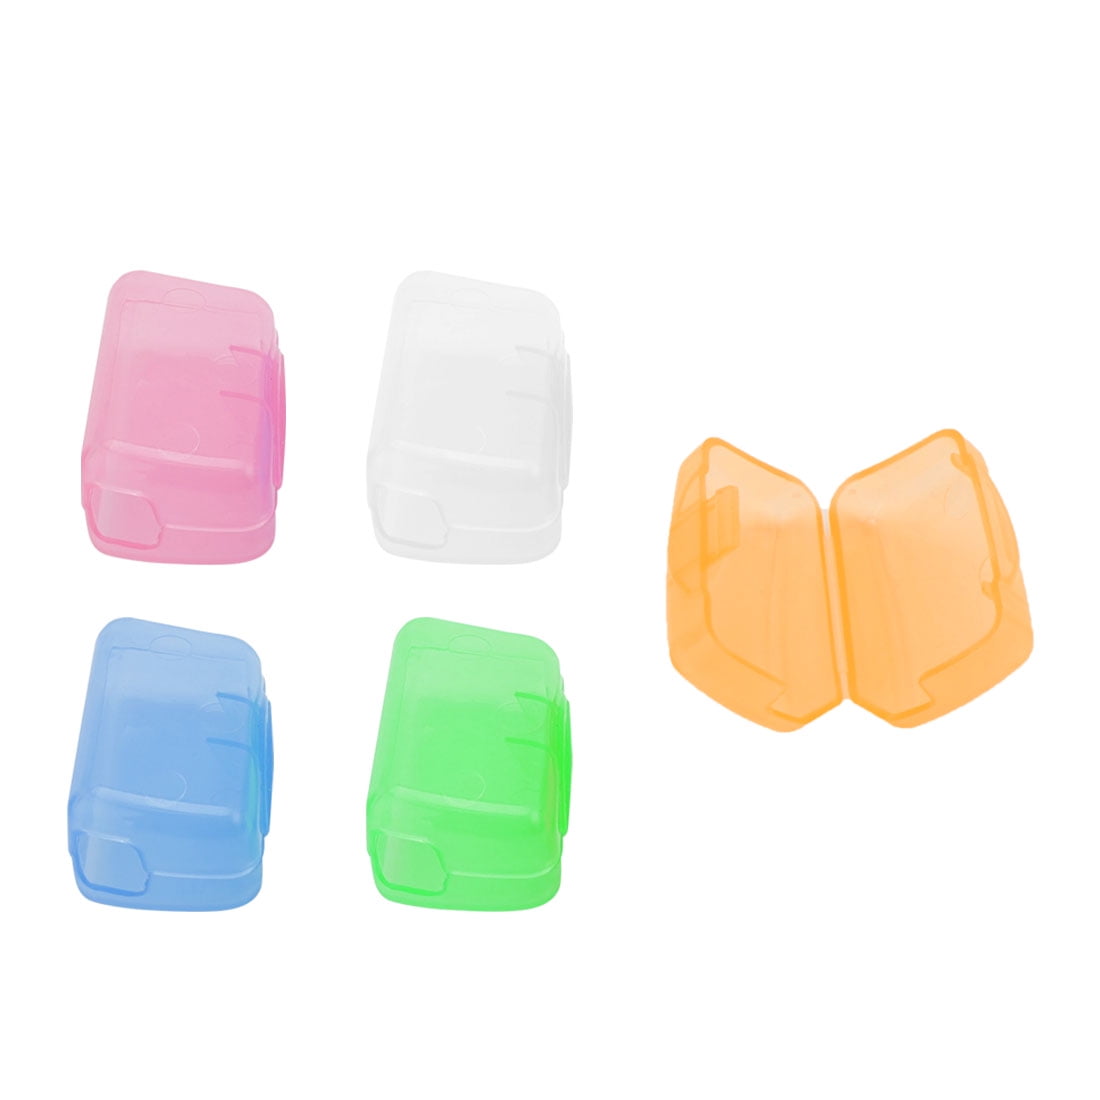 5PCS Toothbrush Head Covers Case Cap Travel Camping Hike Brush Cleaner Protect 